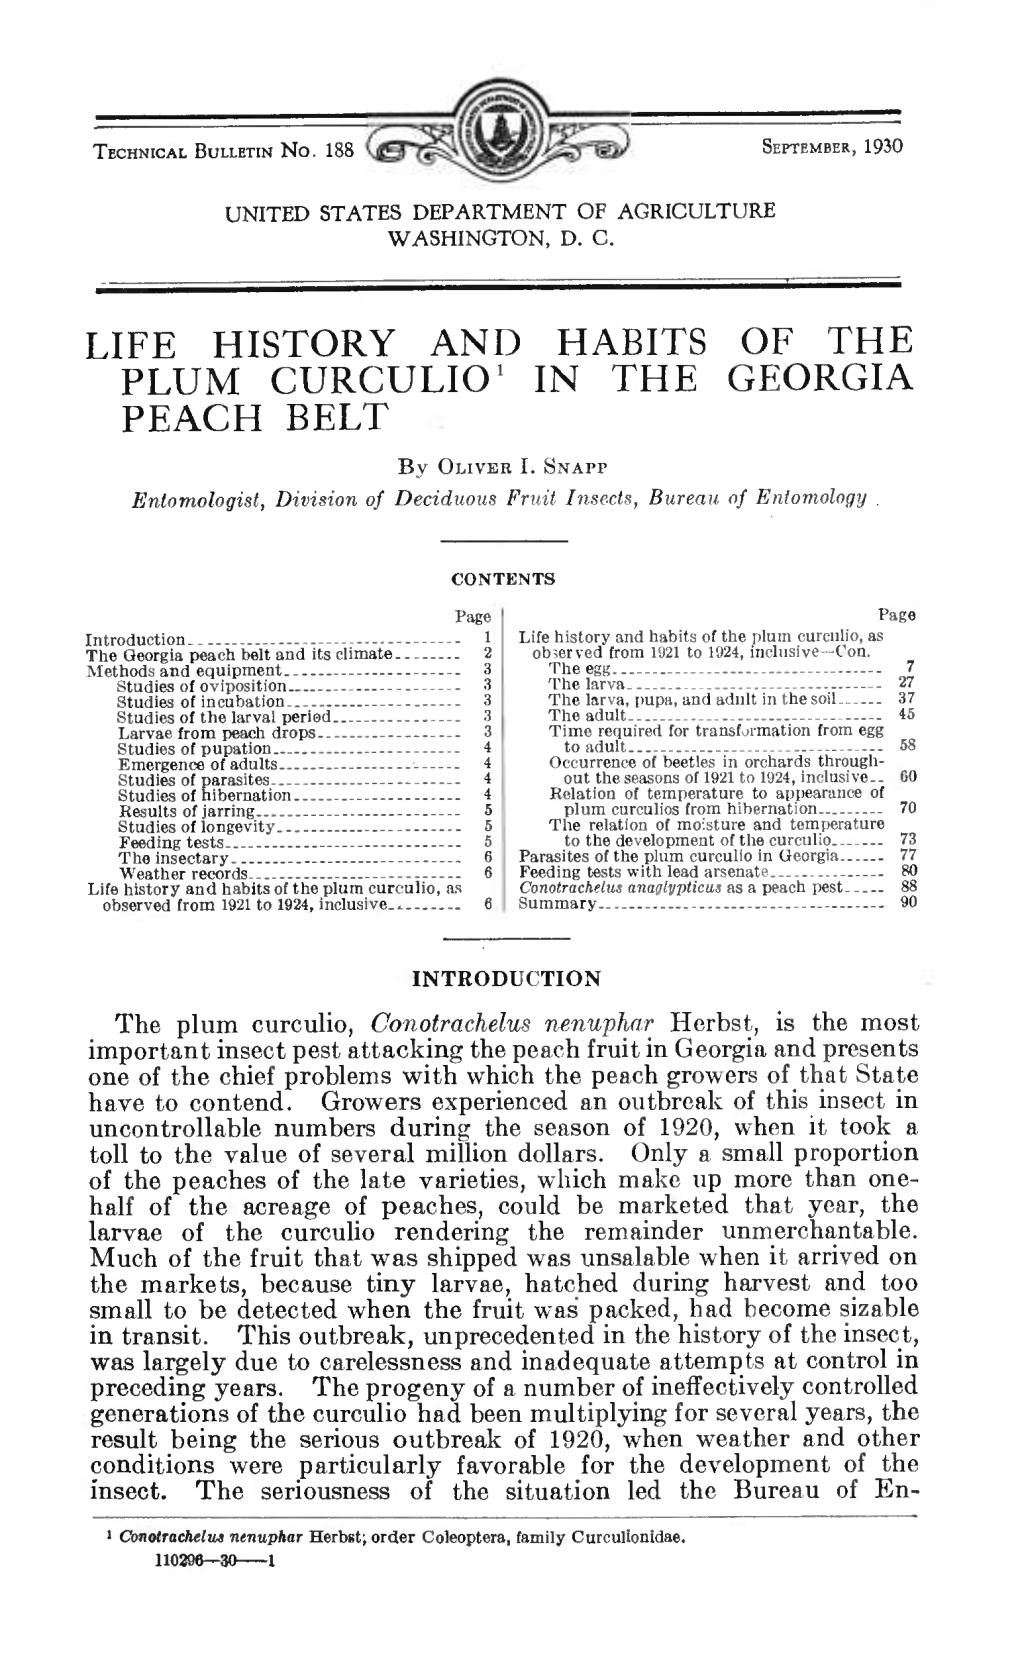 Life History and Habits of the Plum Curculio' in the Georgia Peach Belt